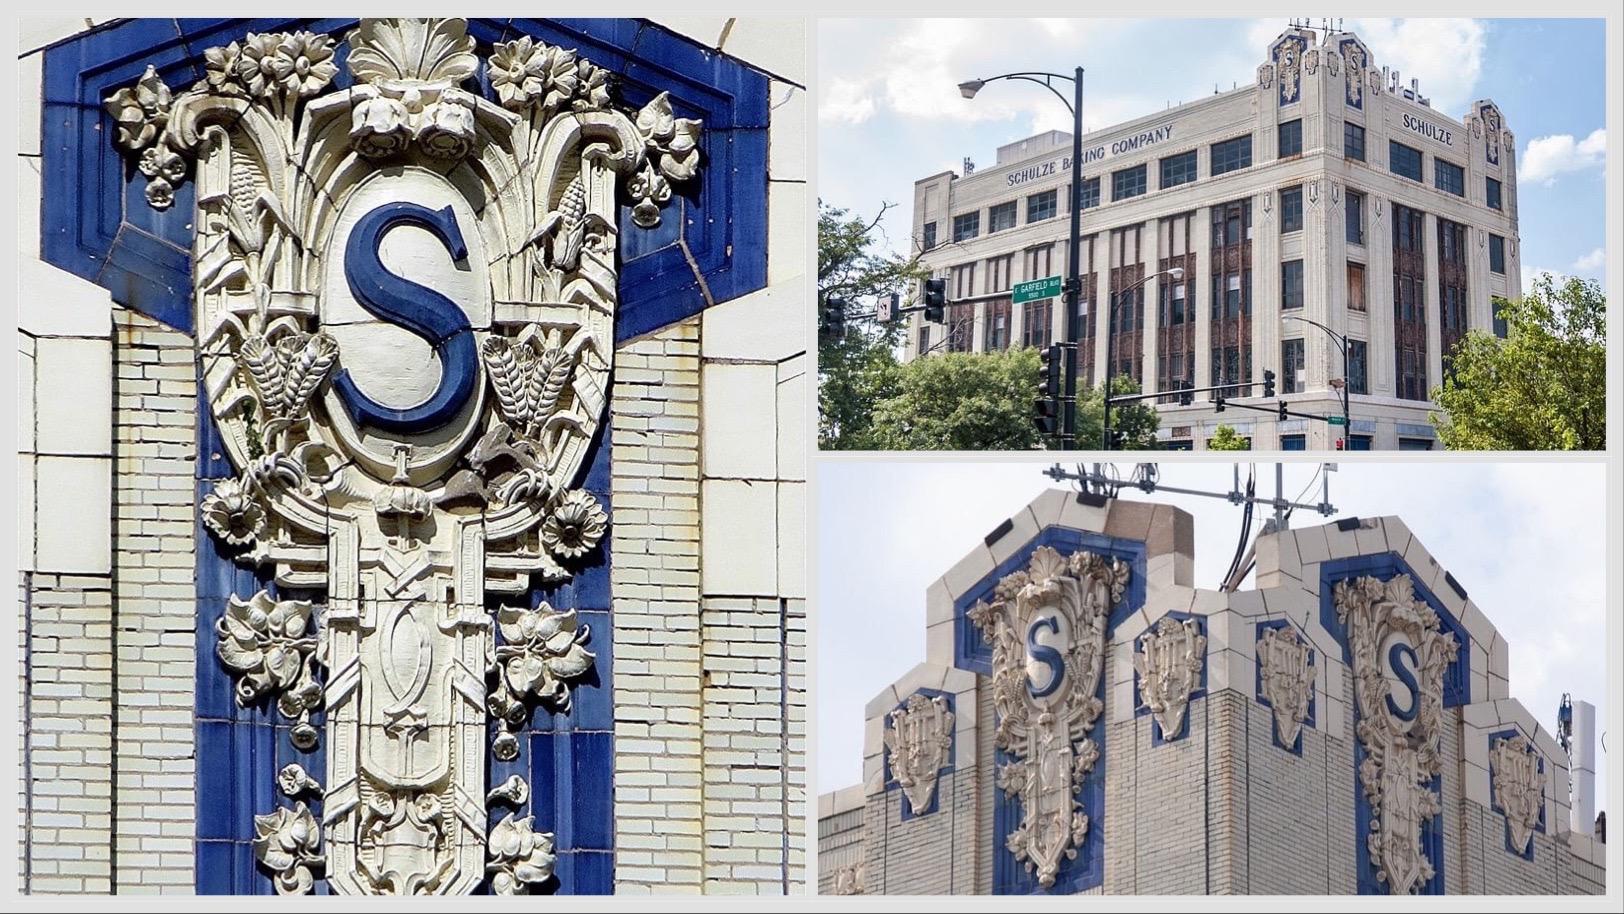 The five-story Schulze Baking Company Building, with its creamy terra cotta and bright blue accents, has anchored the corner of East Garfield Boulevard and South Wabash Avenue since 1914. (Credits, clockwise from left: Debbie Mercer, Eric Allix Rogers (2)) 